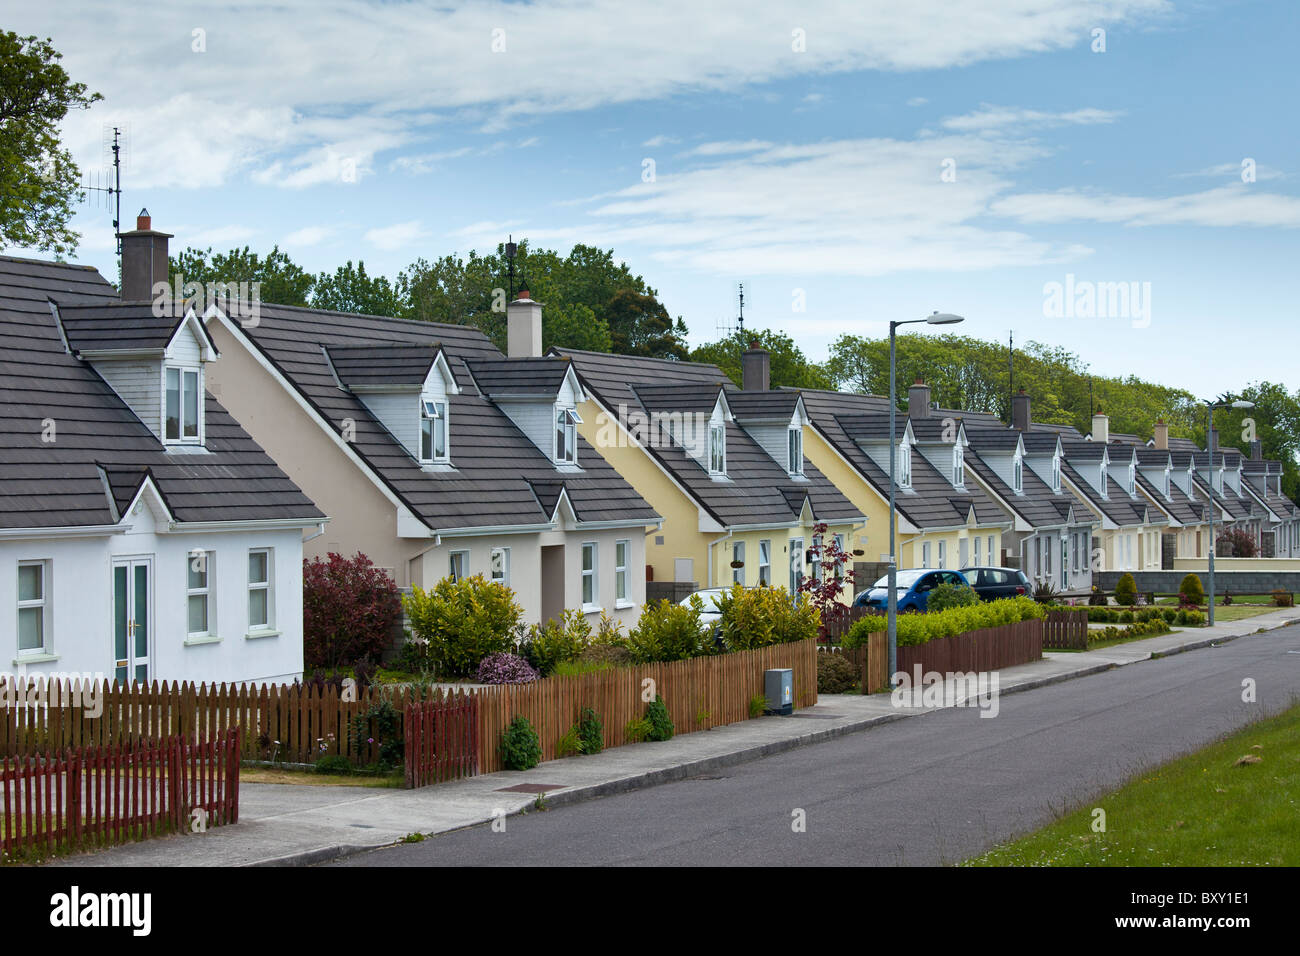 New build houses new development in County Cork, Ireland. EU funds led to 'Celtic tiger' investment in the Republic Stock Photo